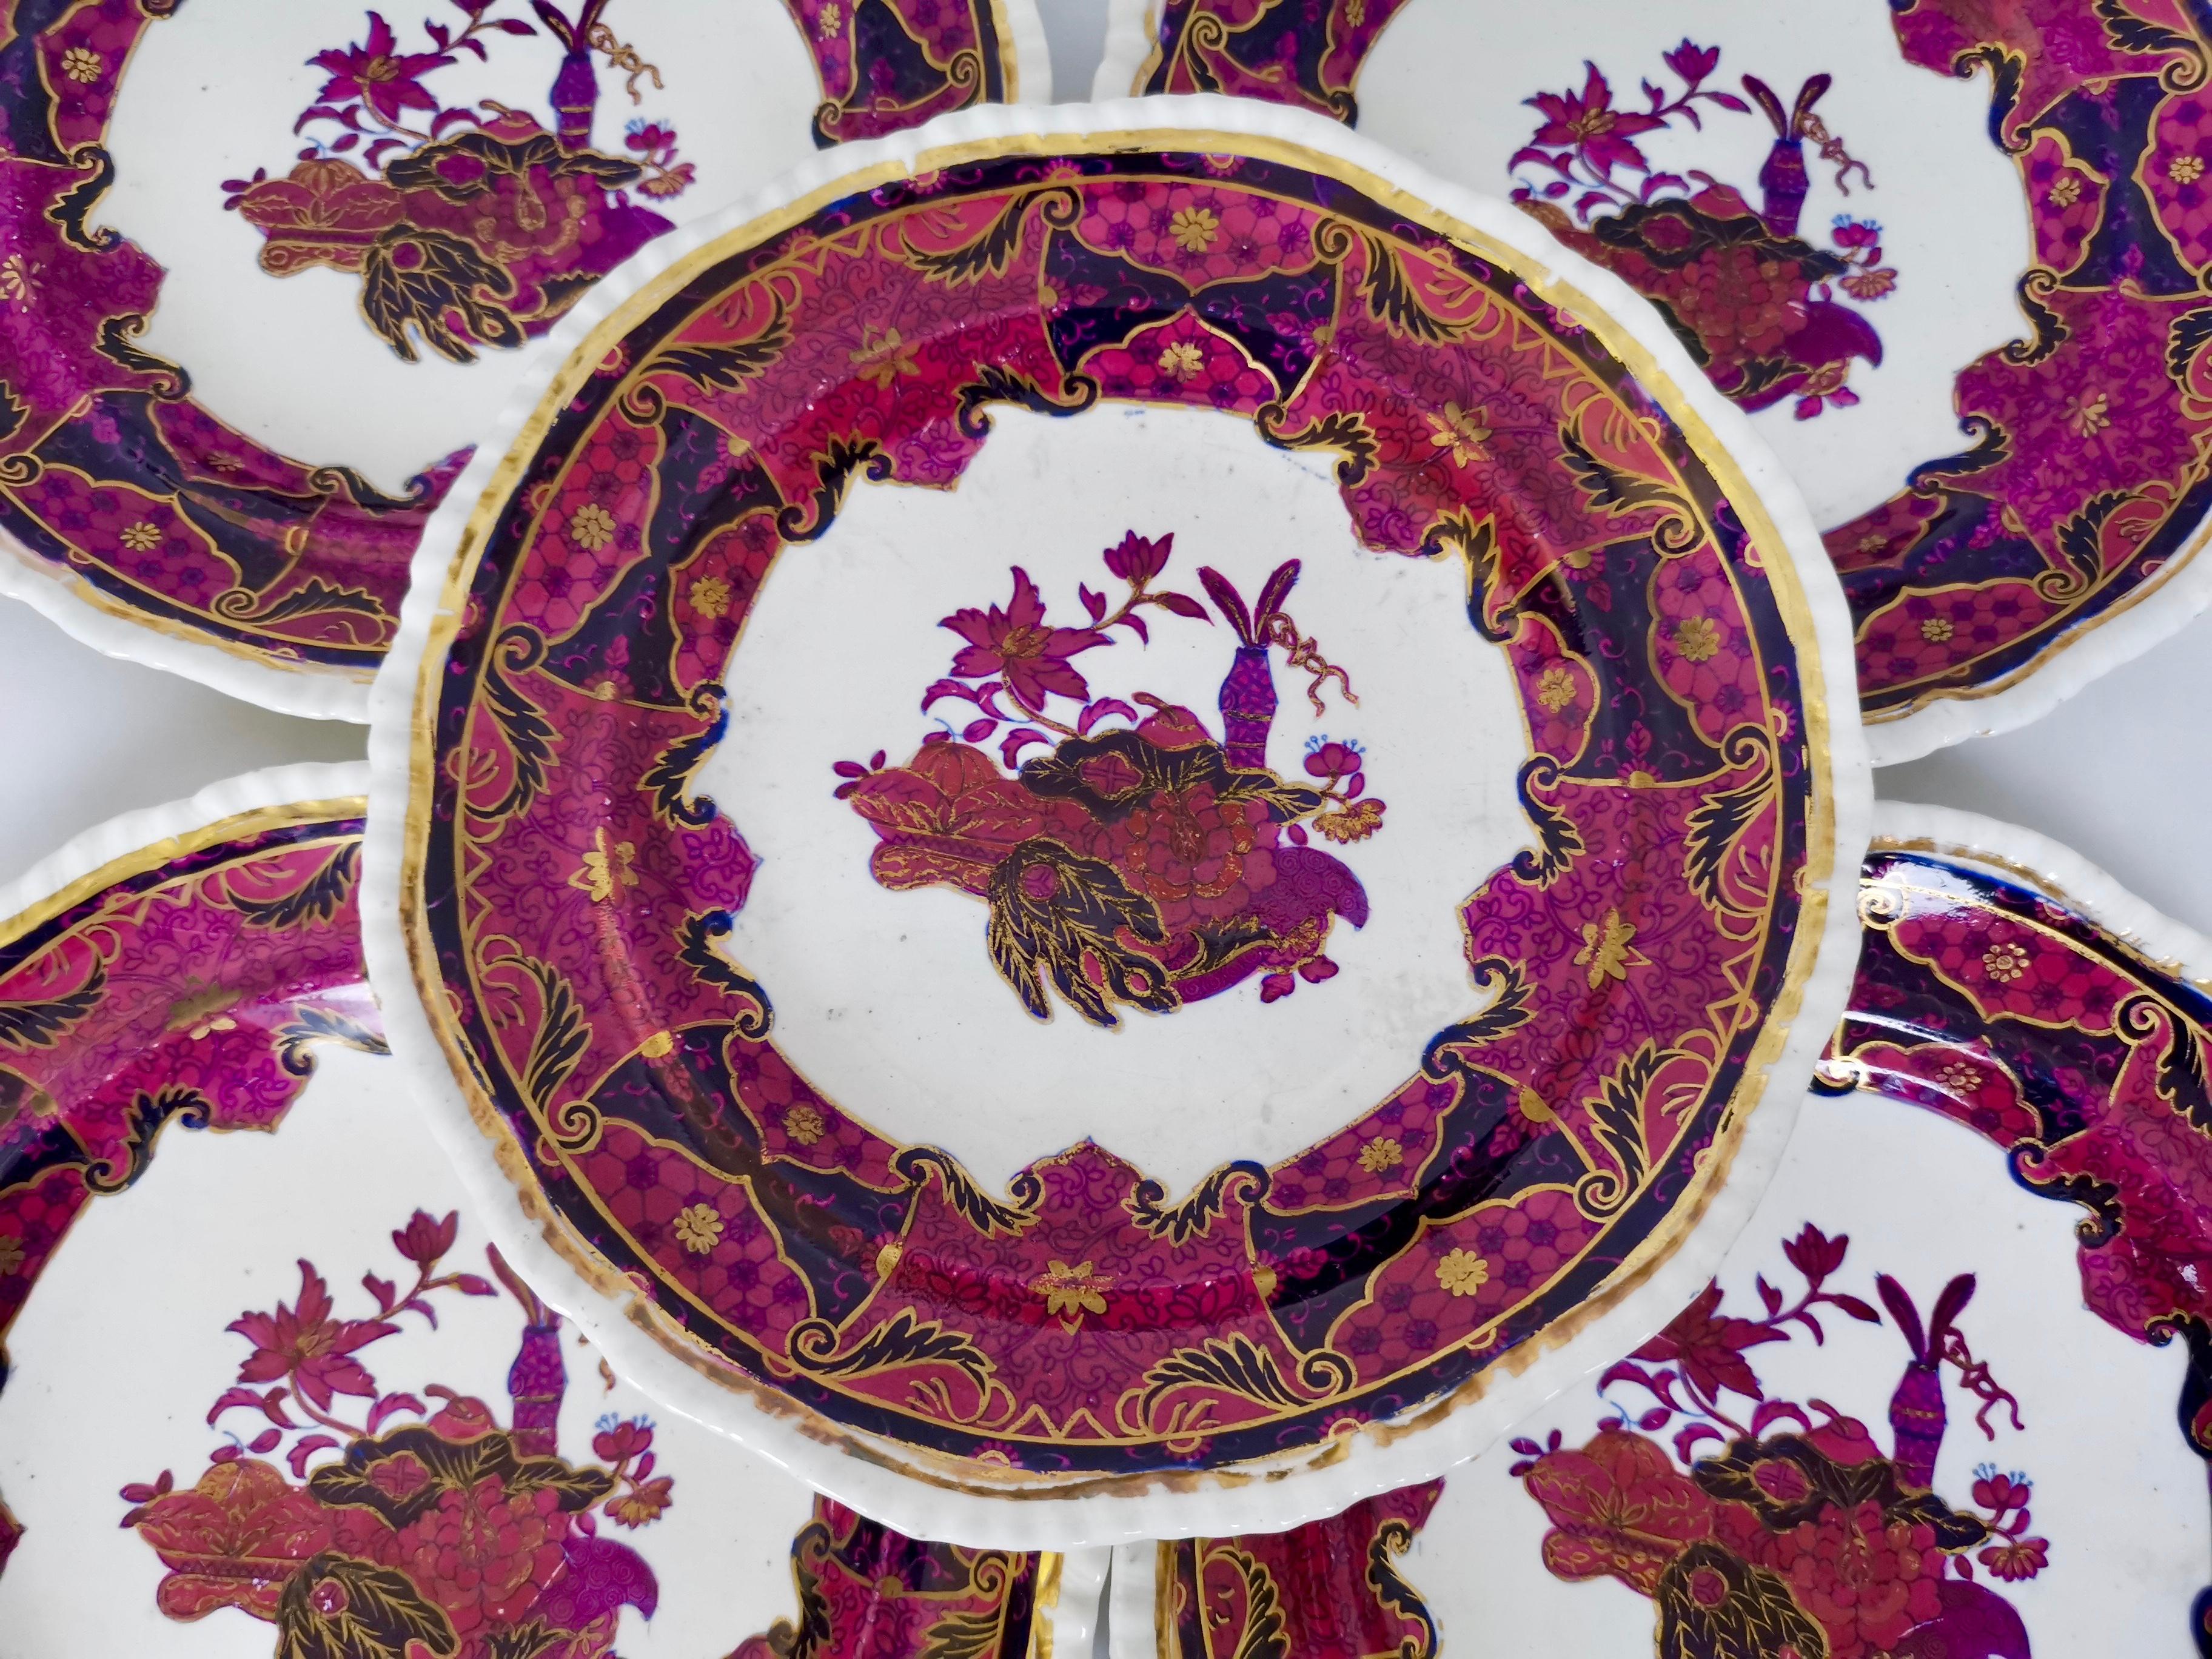 Spode Imperial China Dessert Service, Frog Pattern in Mauve, Regency circa 1828 For Sale 3